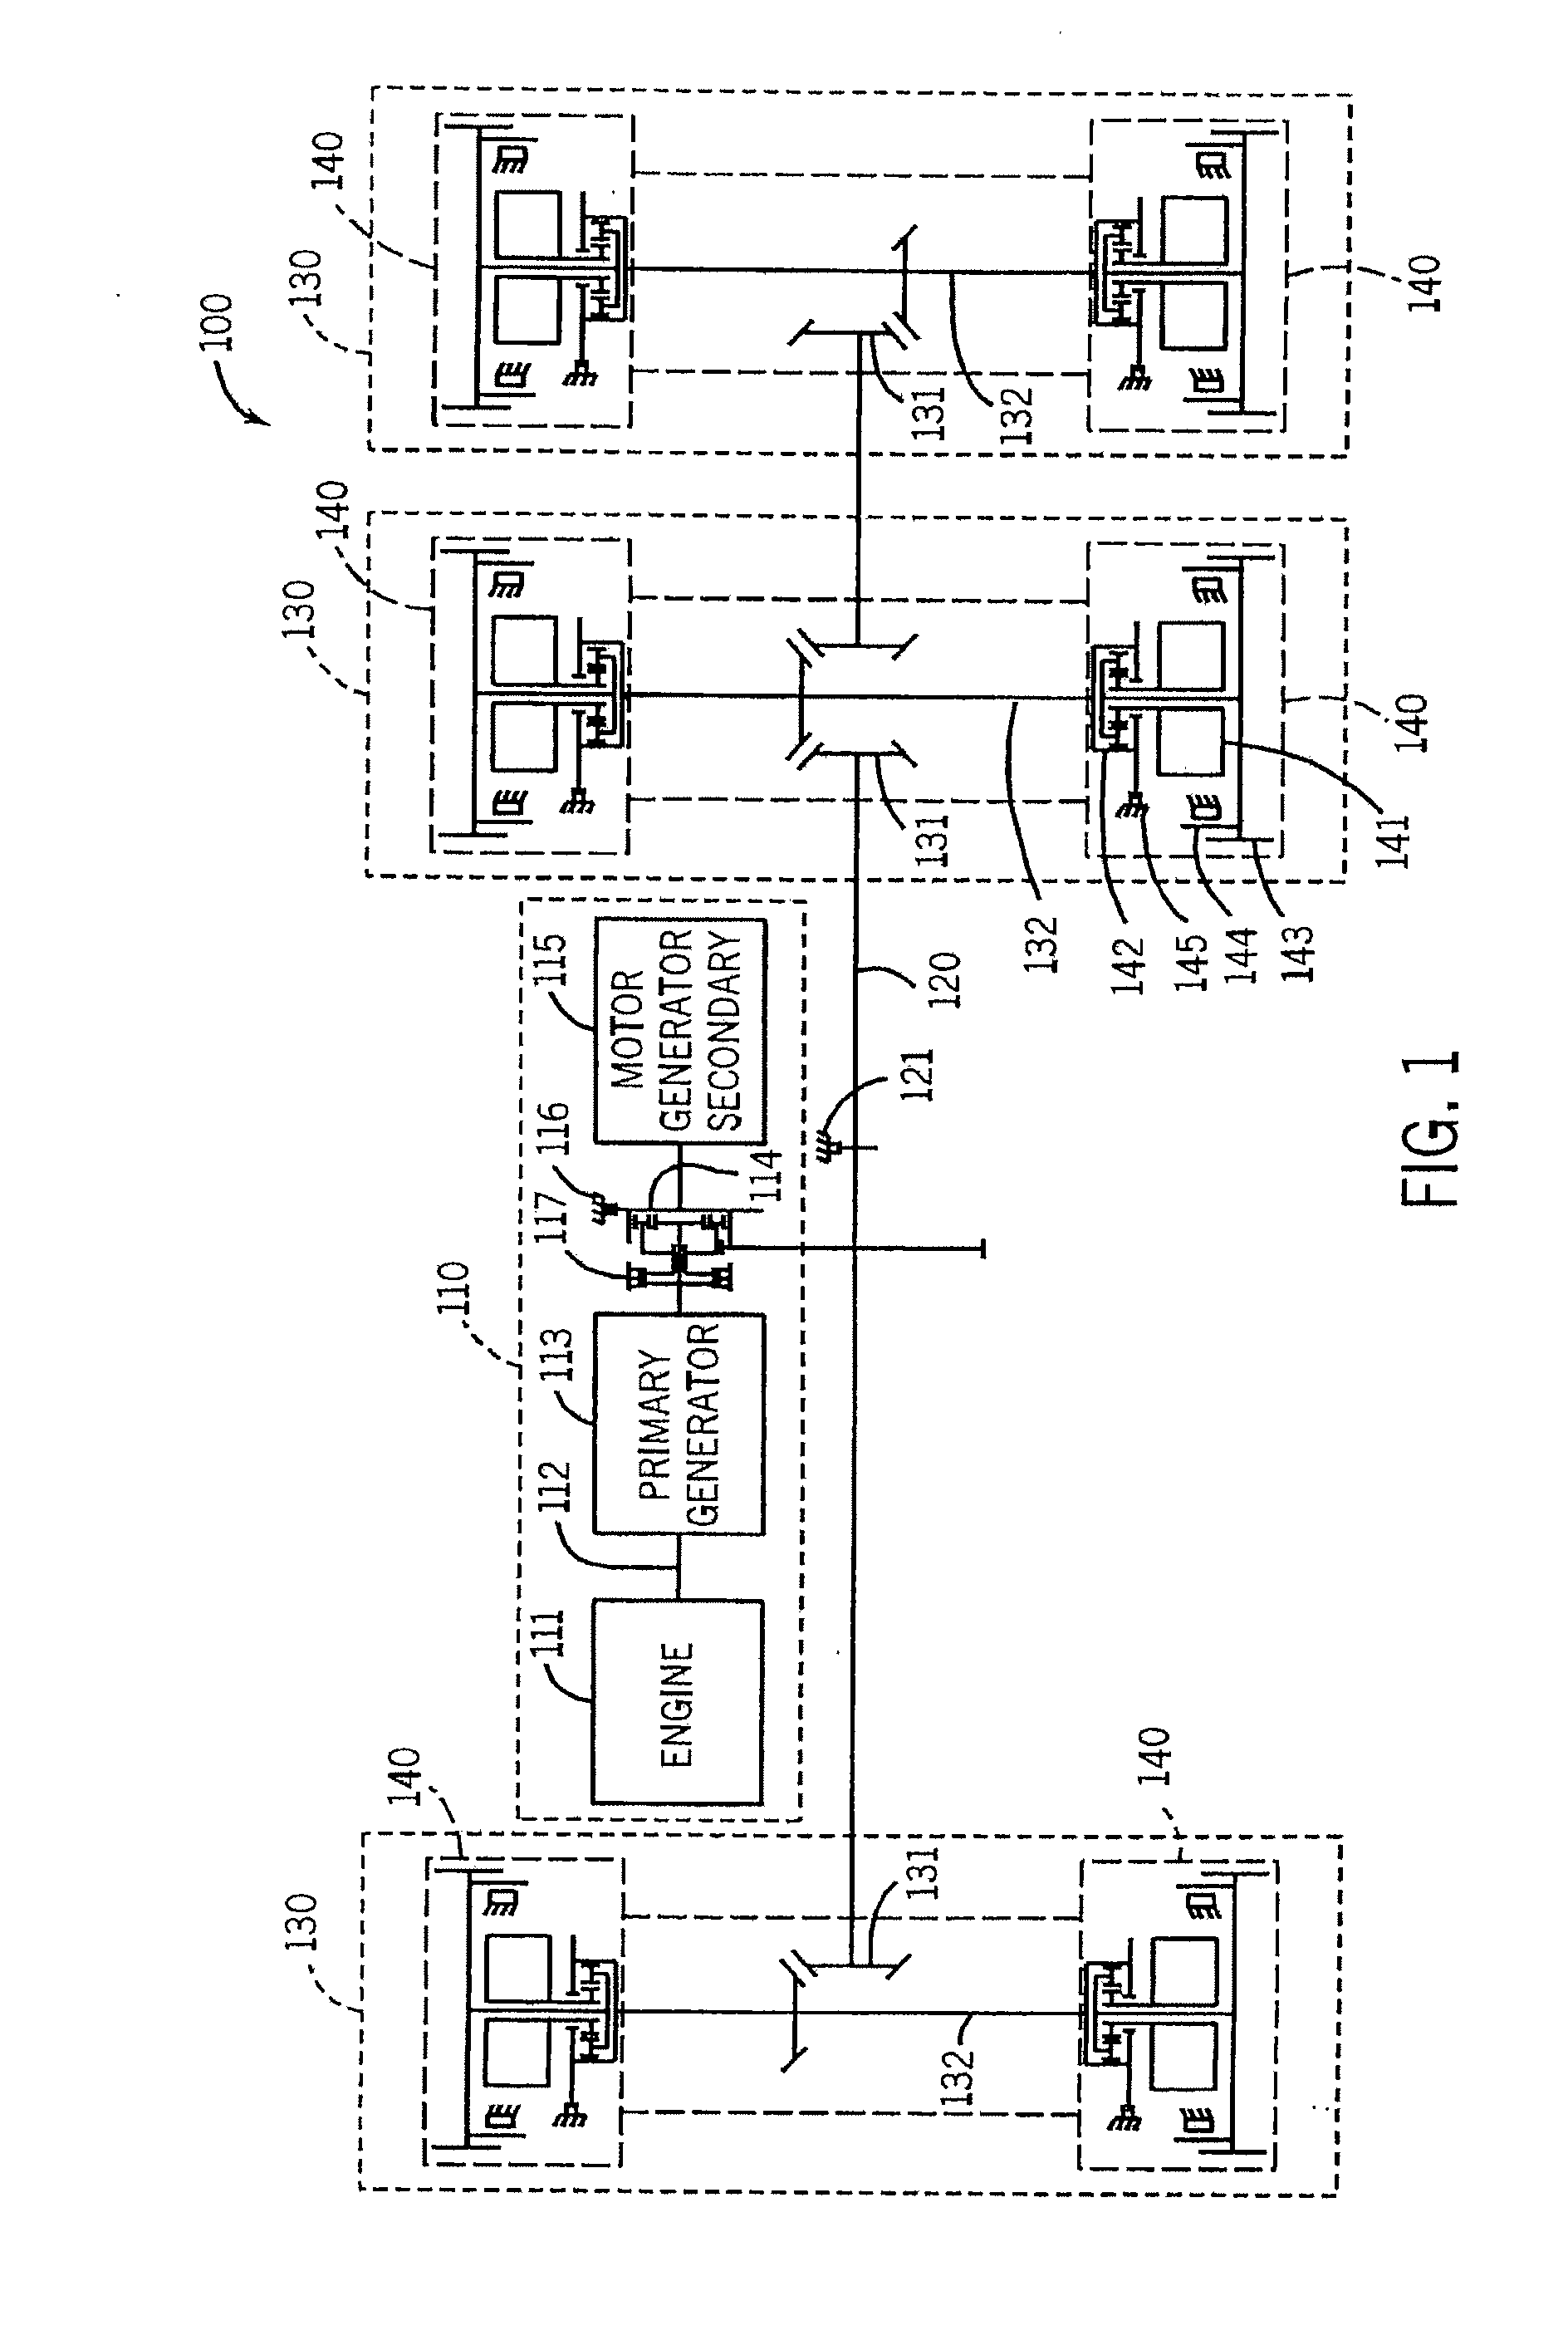 Hybrid vehicle with combustion engine/electric motor drive